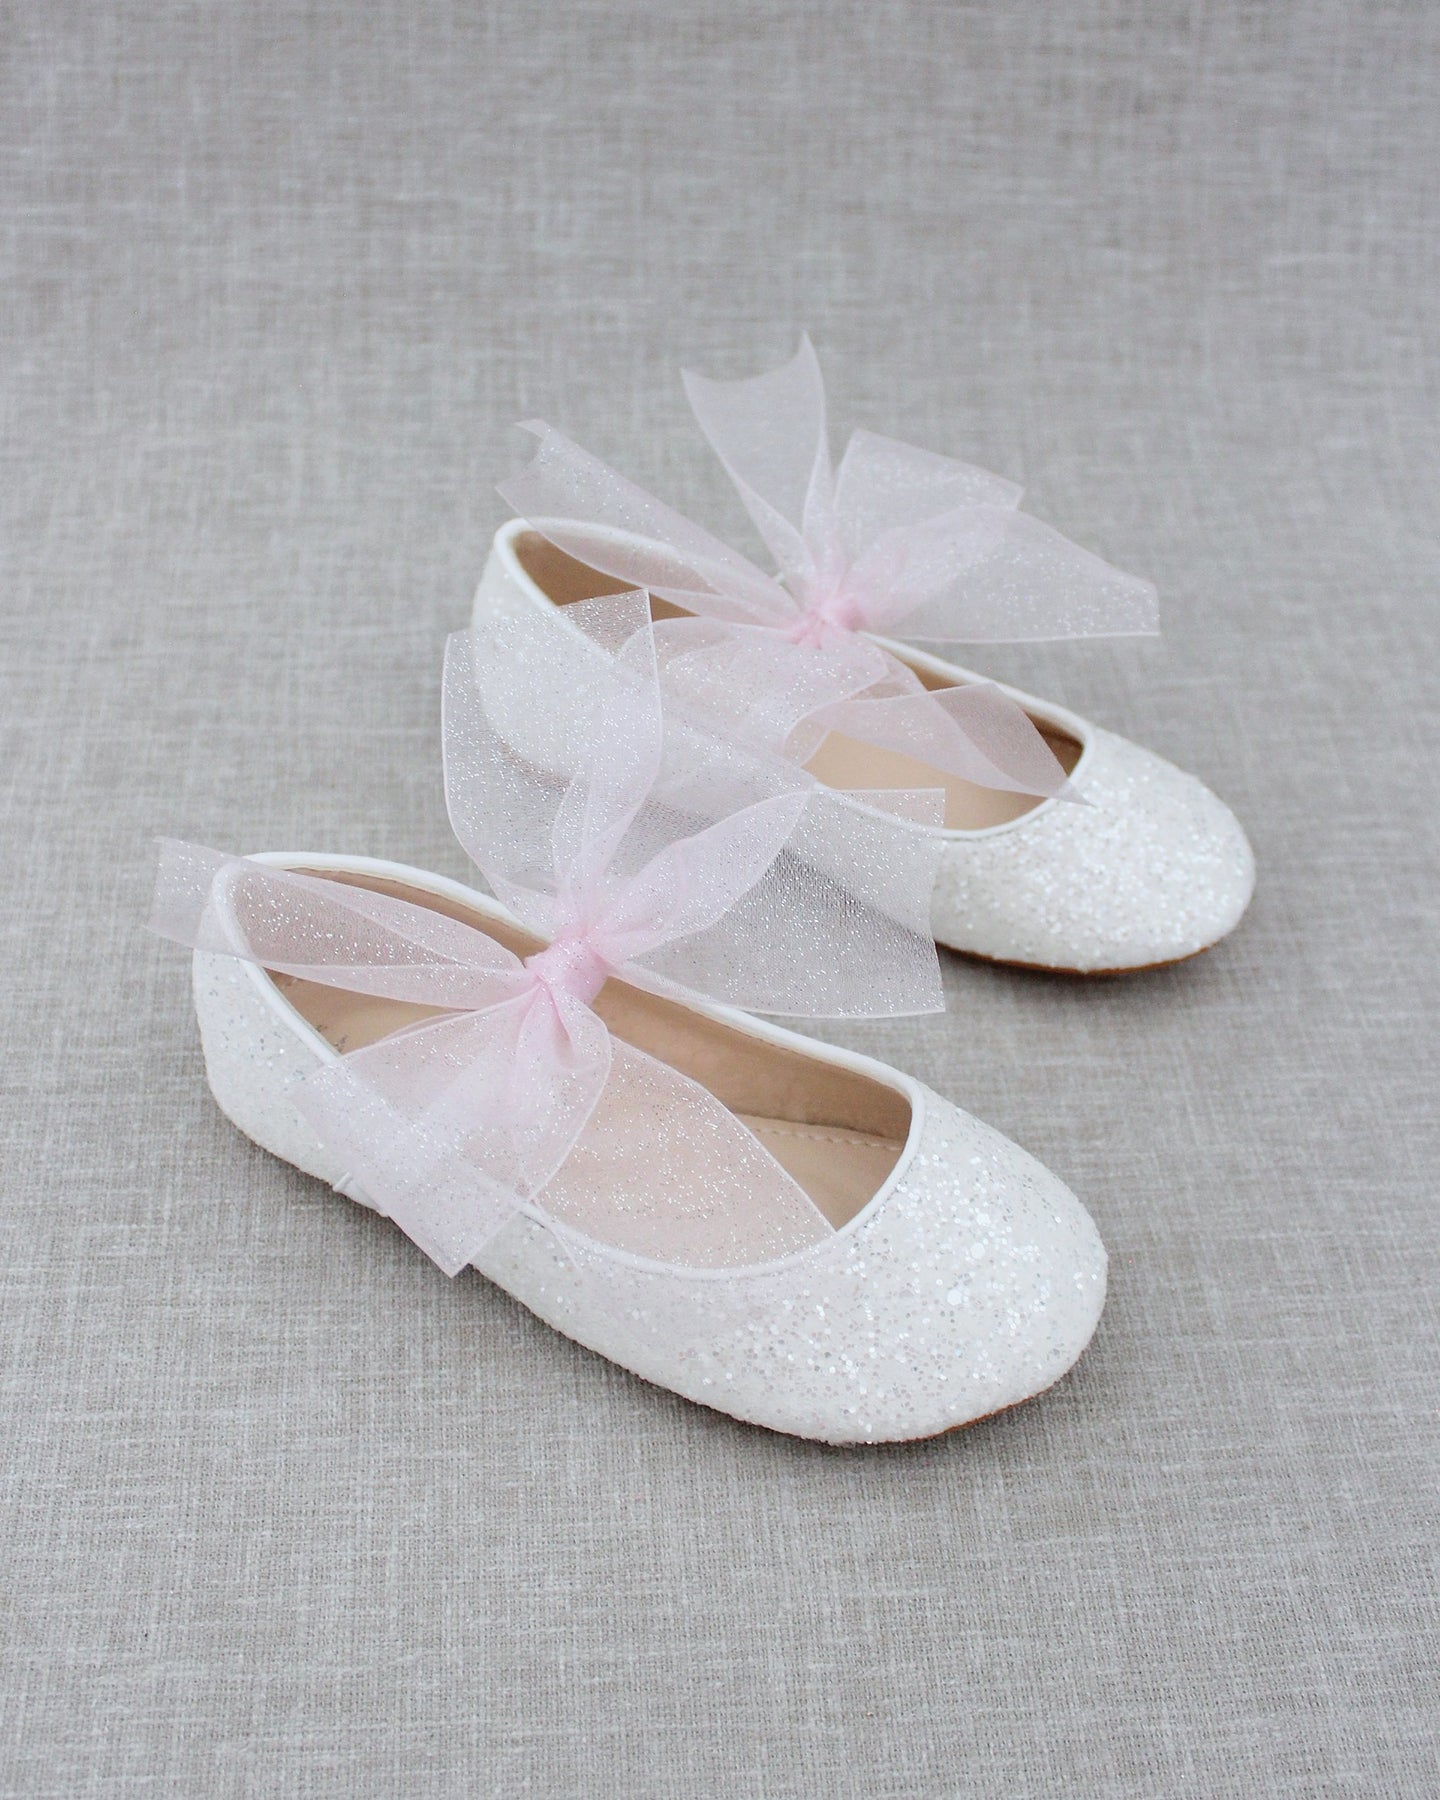 Kids Shoes, Princess Shoes, Mary Jane Shoes, Flower Girls Shoes – Page ...